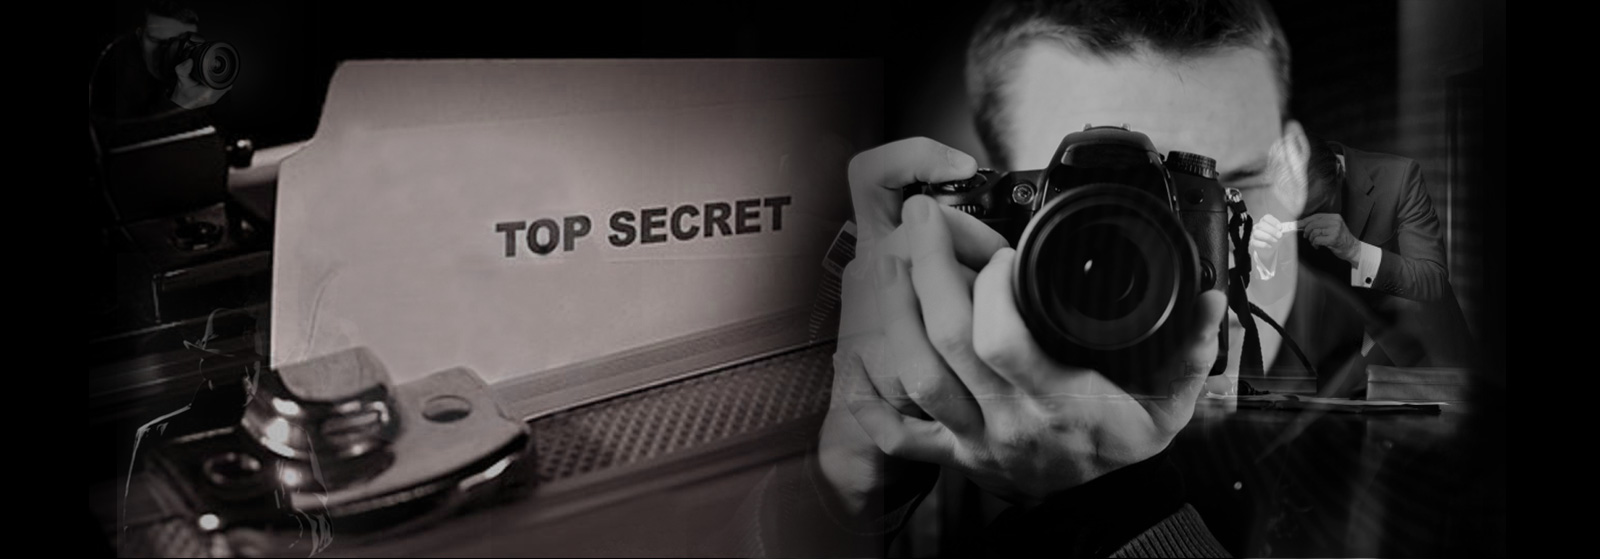 top secret writing and private detective with a camera